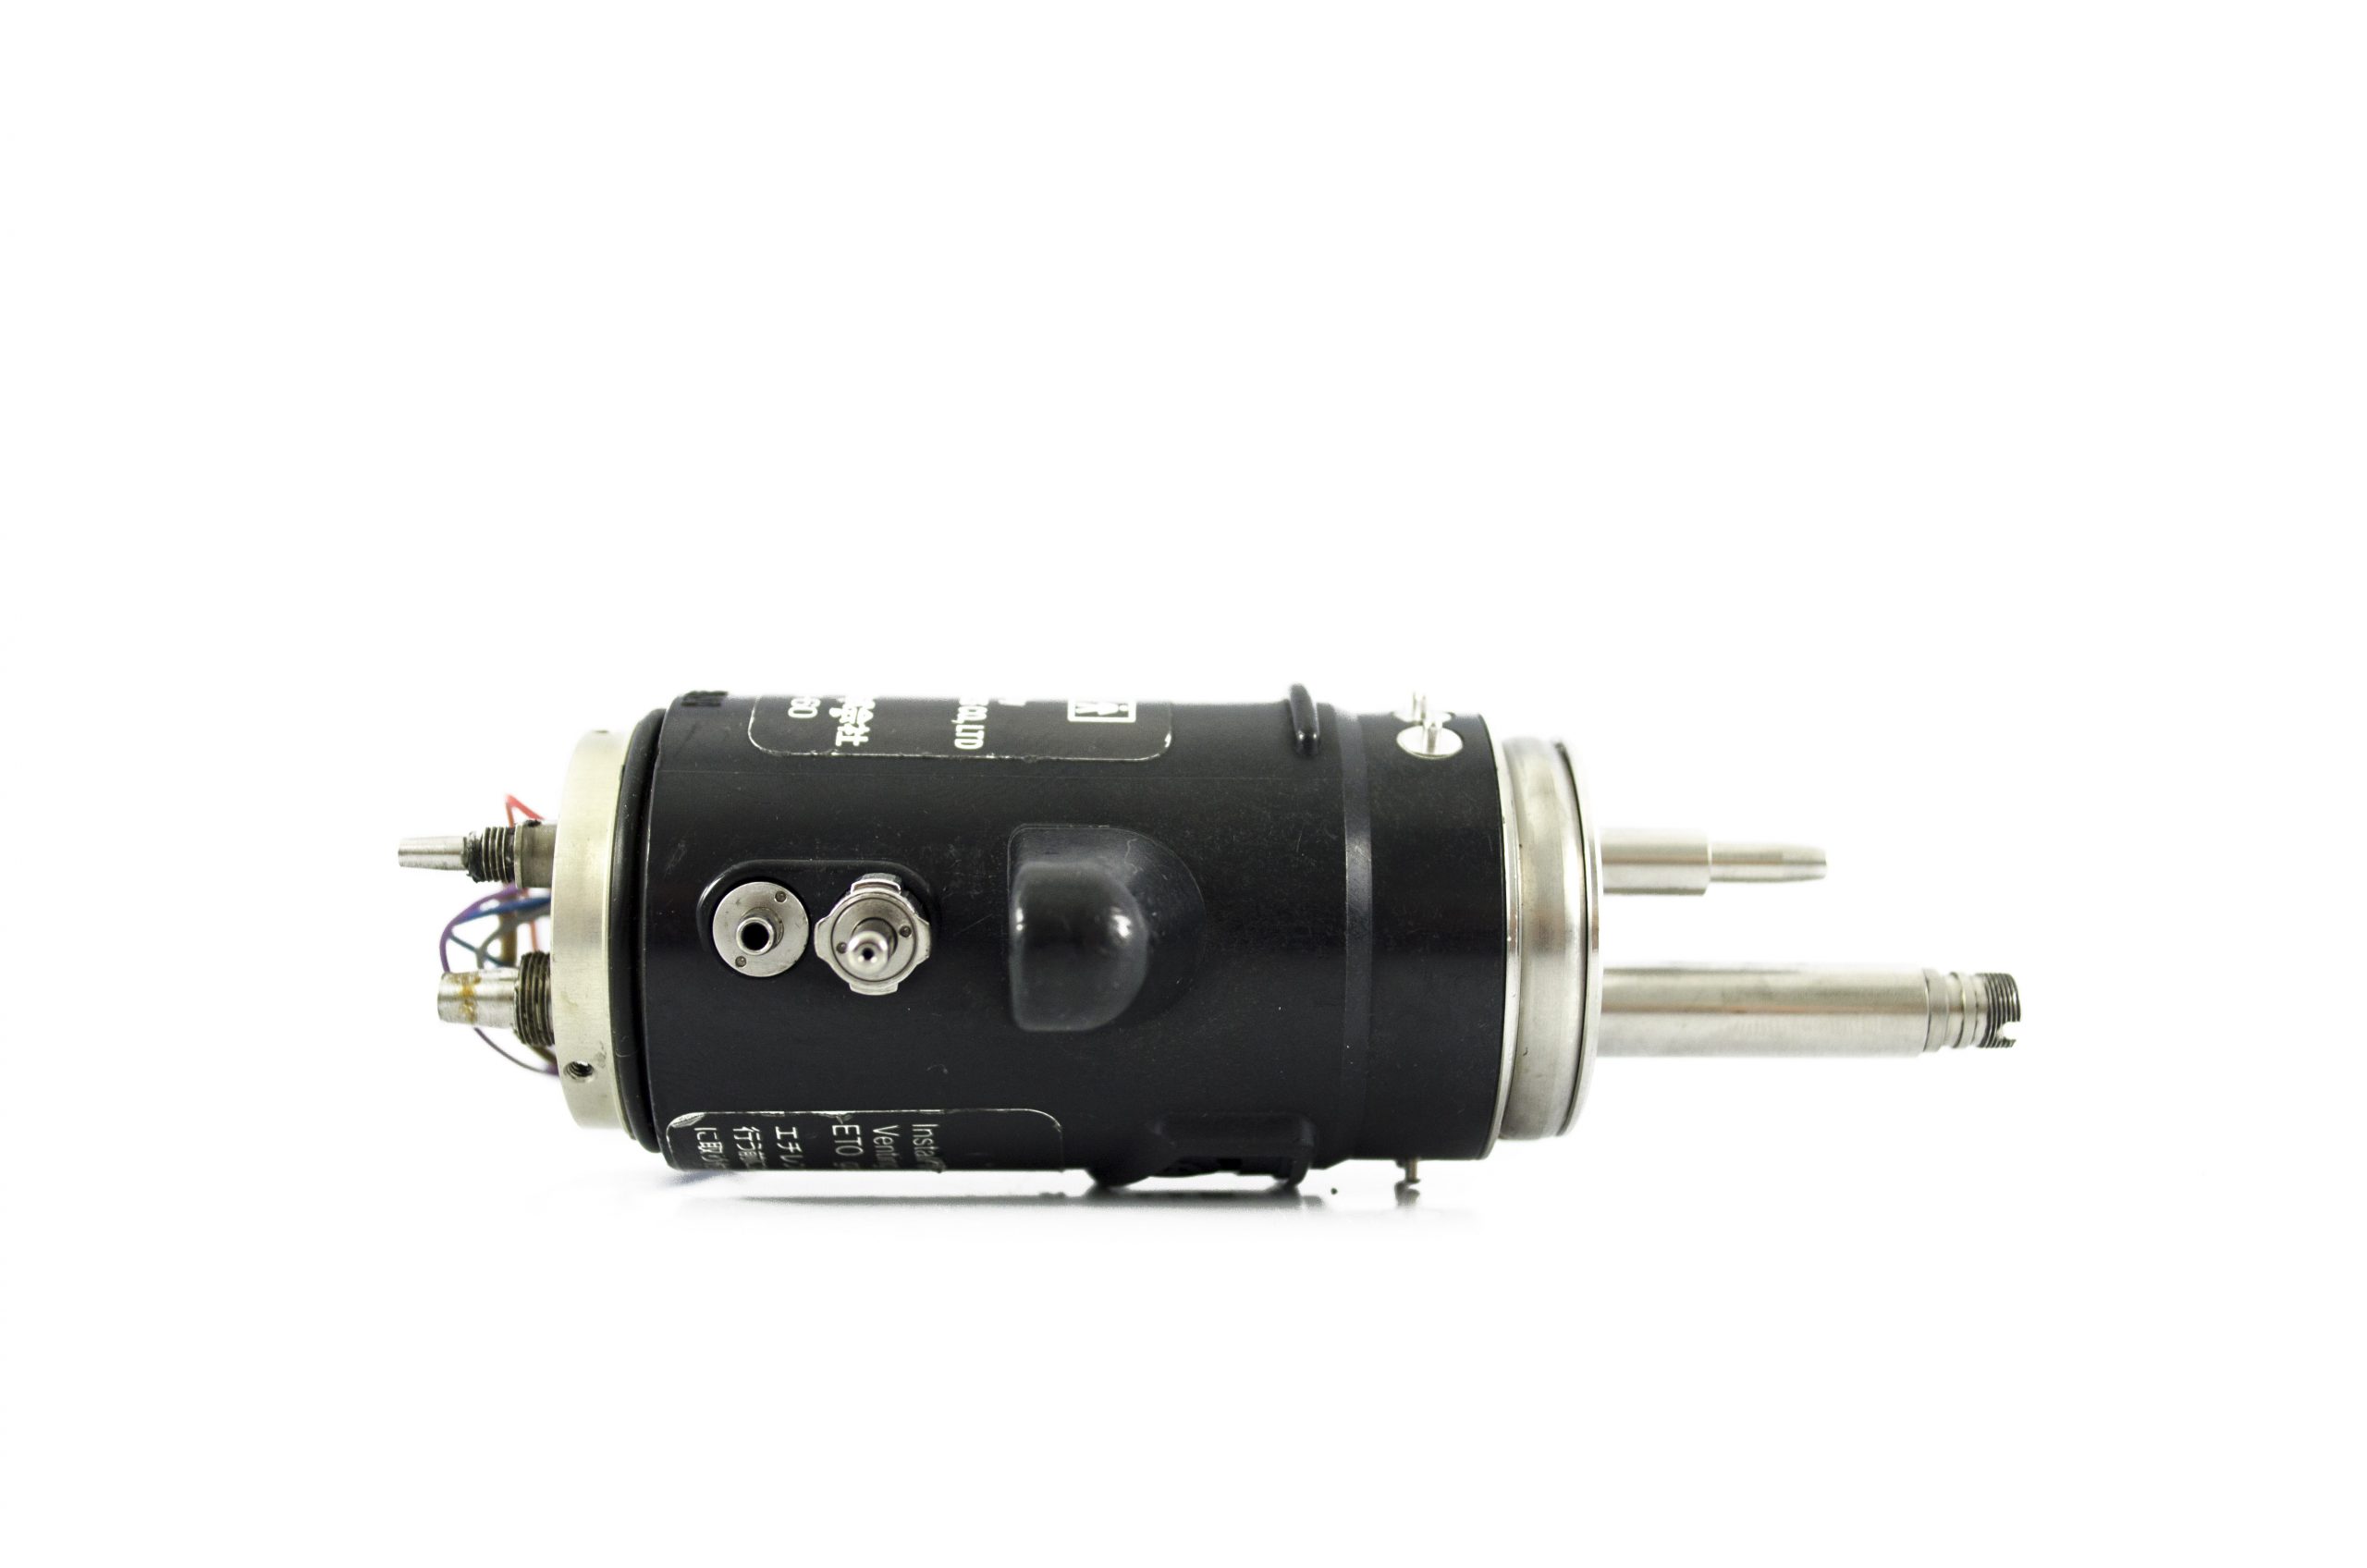 OEM Connector Body Sub-Assembly - CF-40L, GIF-Q40, GIF-XQ40 (ETO Valve Attached)